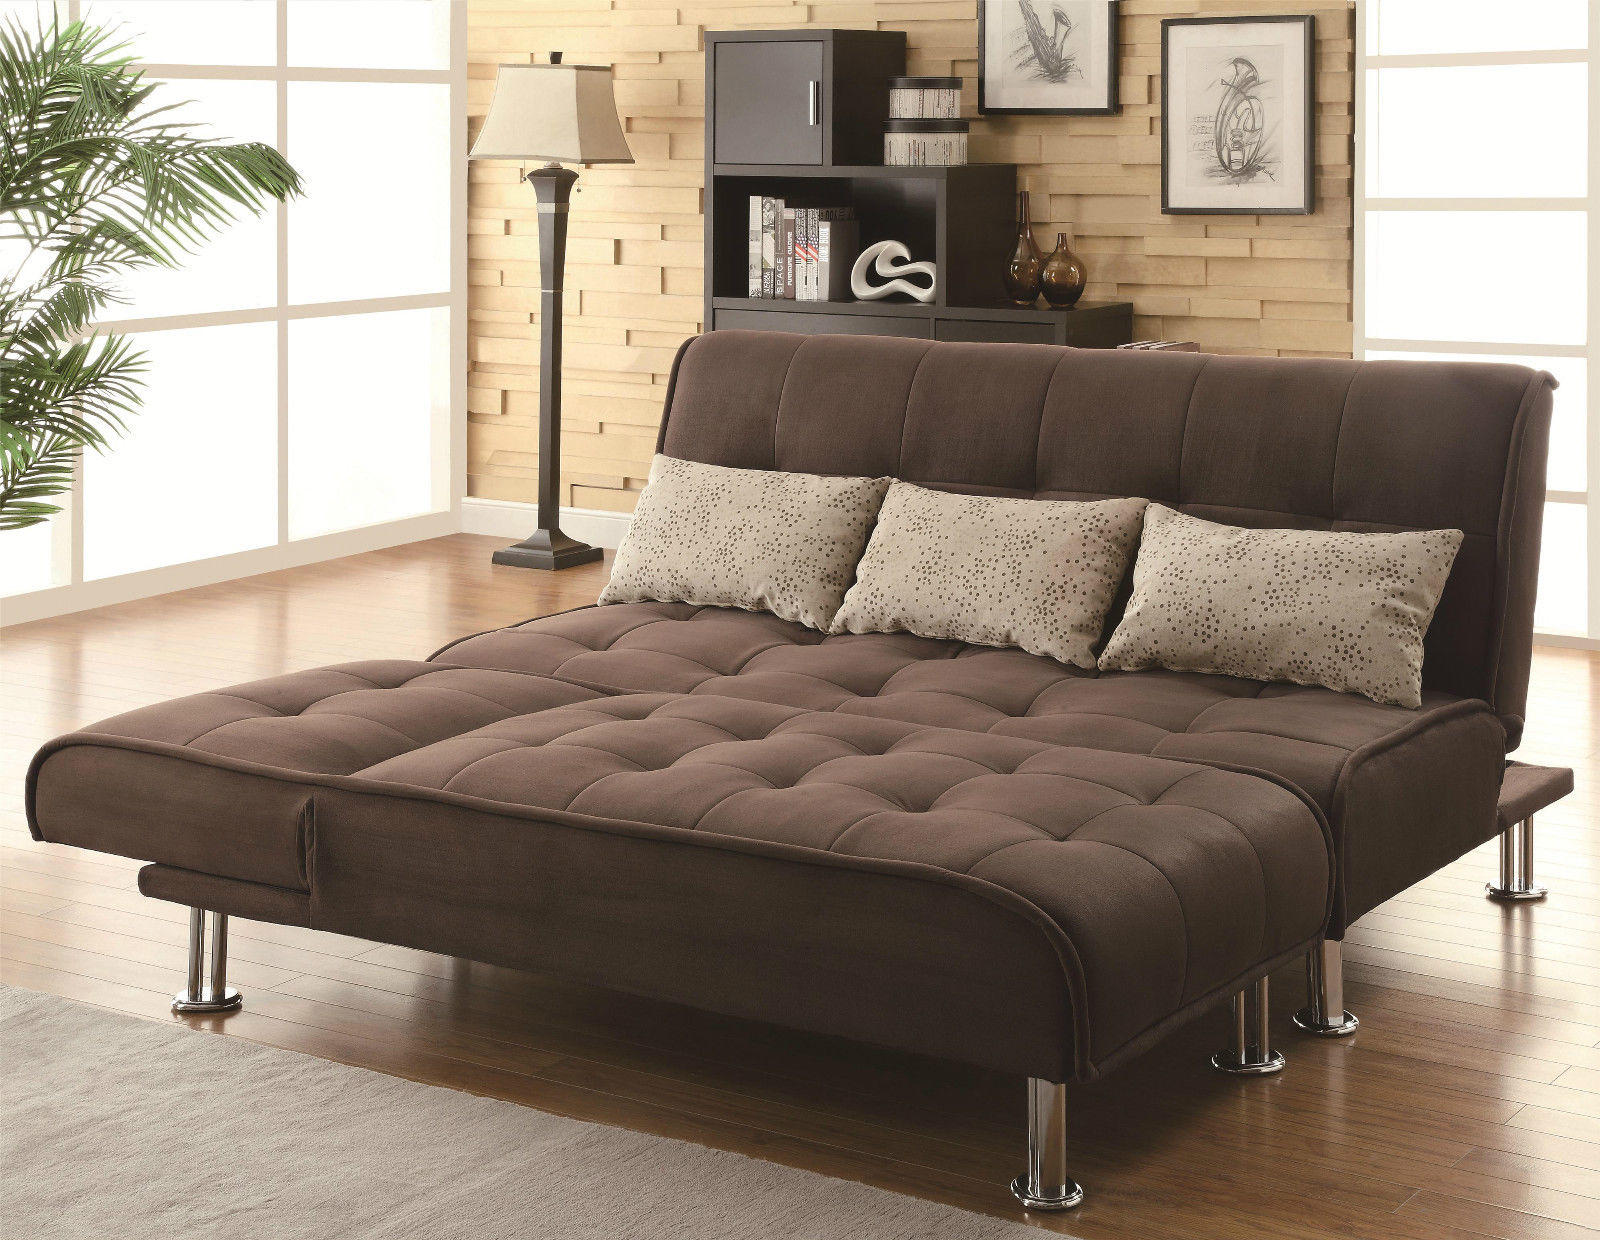 How to Get the Best Small Sectional Sleeper Sofa? | Cool ...